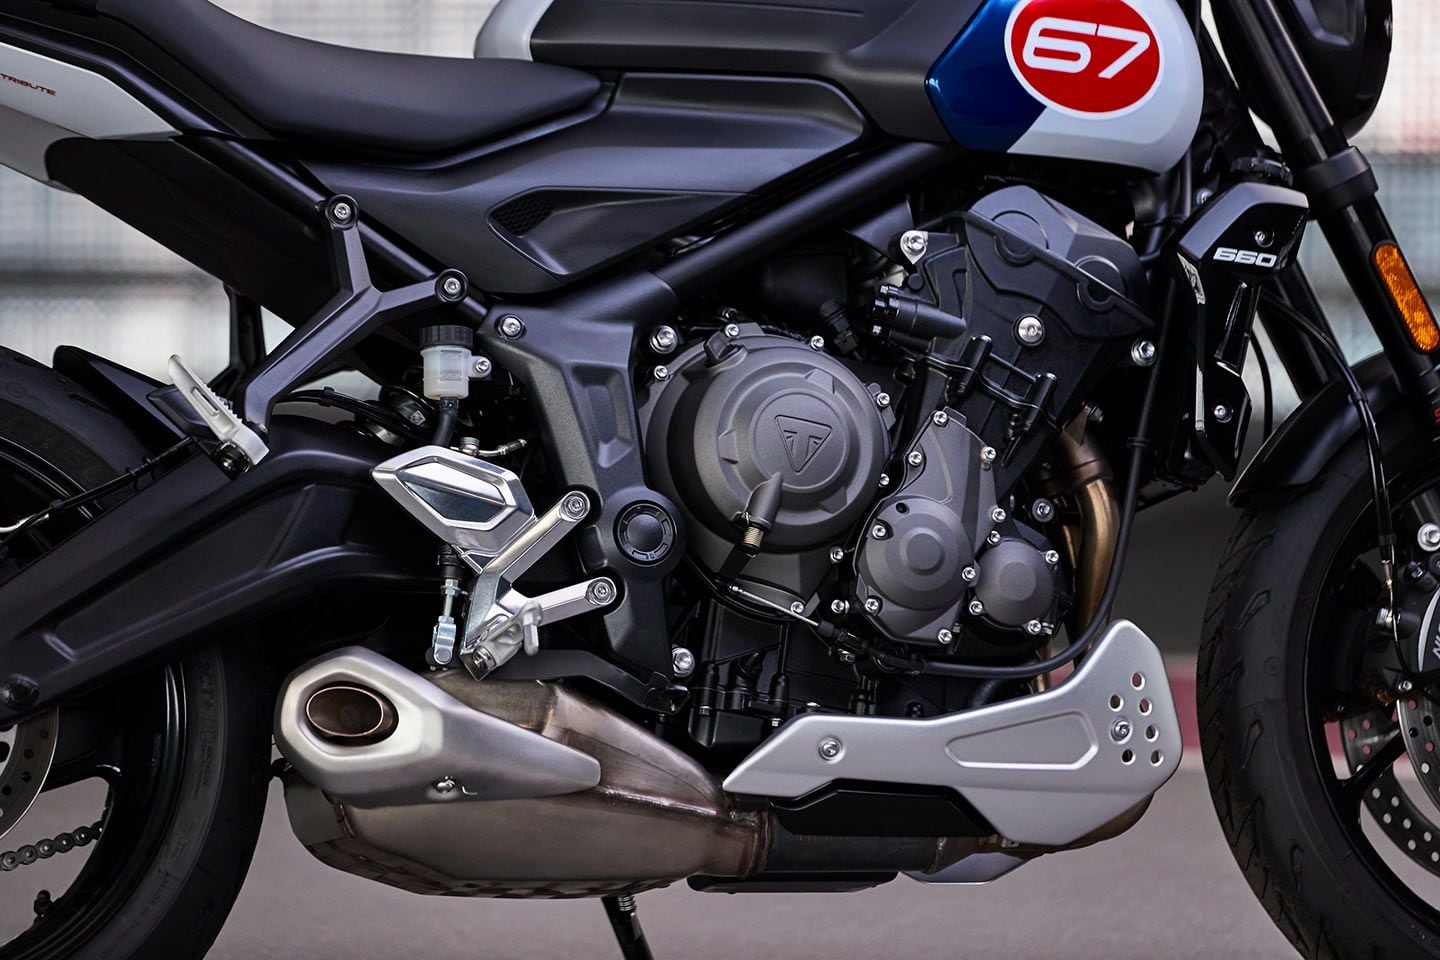 The 660cc engine is a shorter-stroke version of the triple that once powered Triumph’s 675 supersport. In this lower-performing application, maintenance intervals are stretched to 10,000 miles.